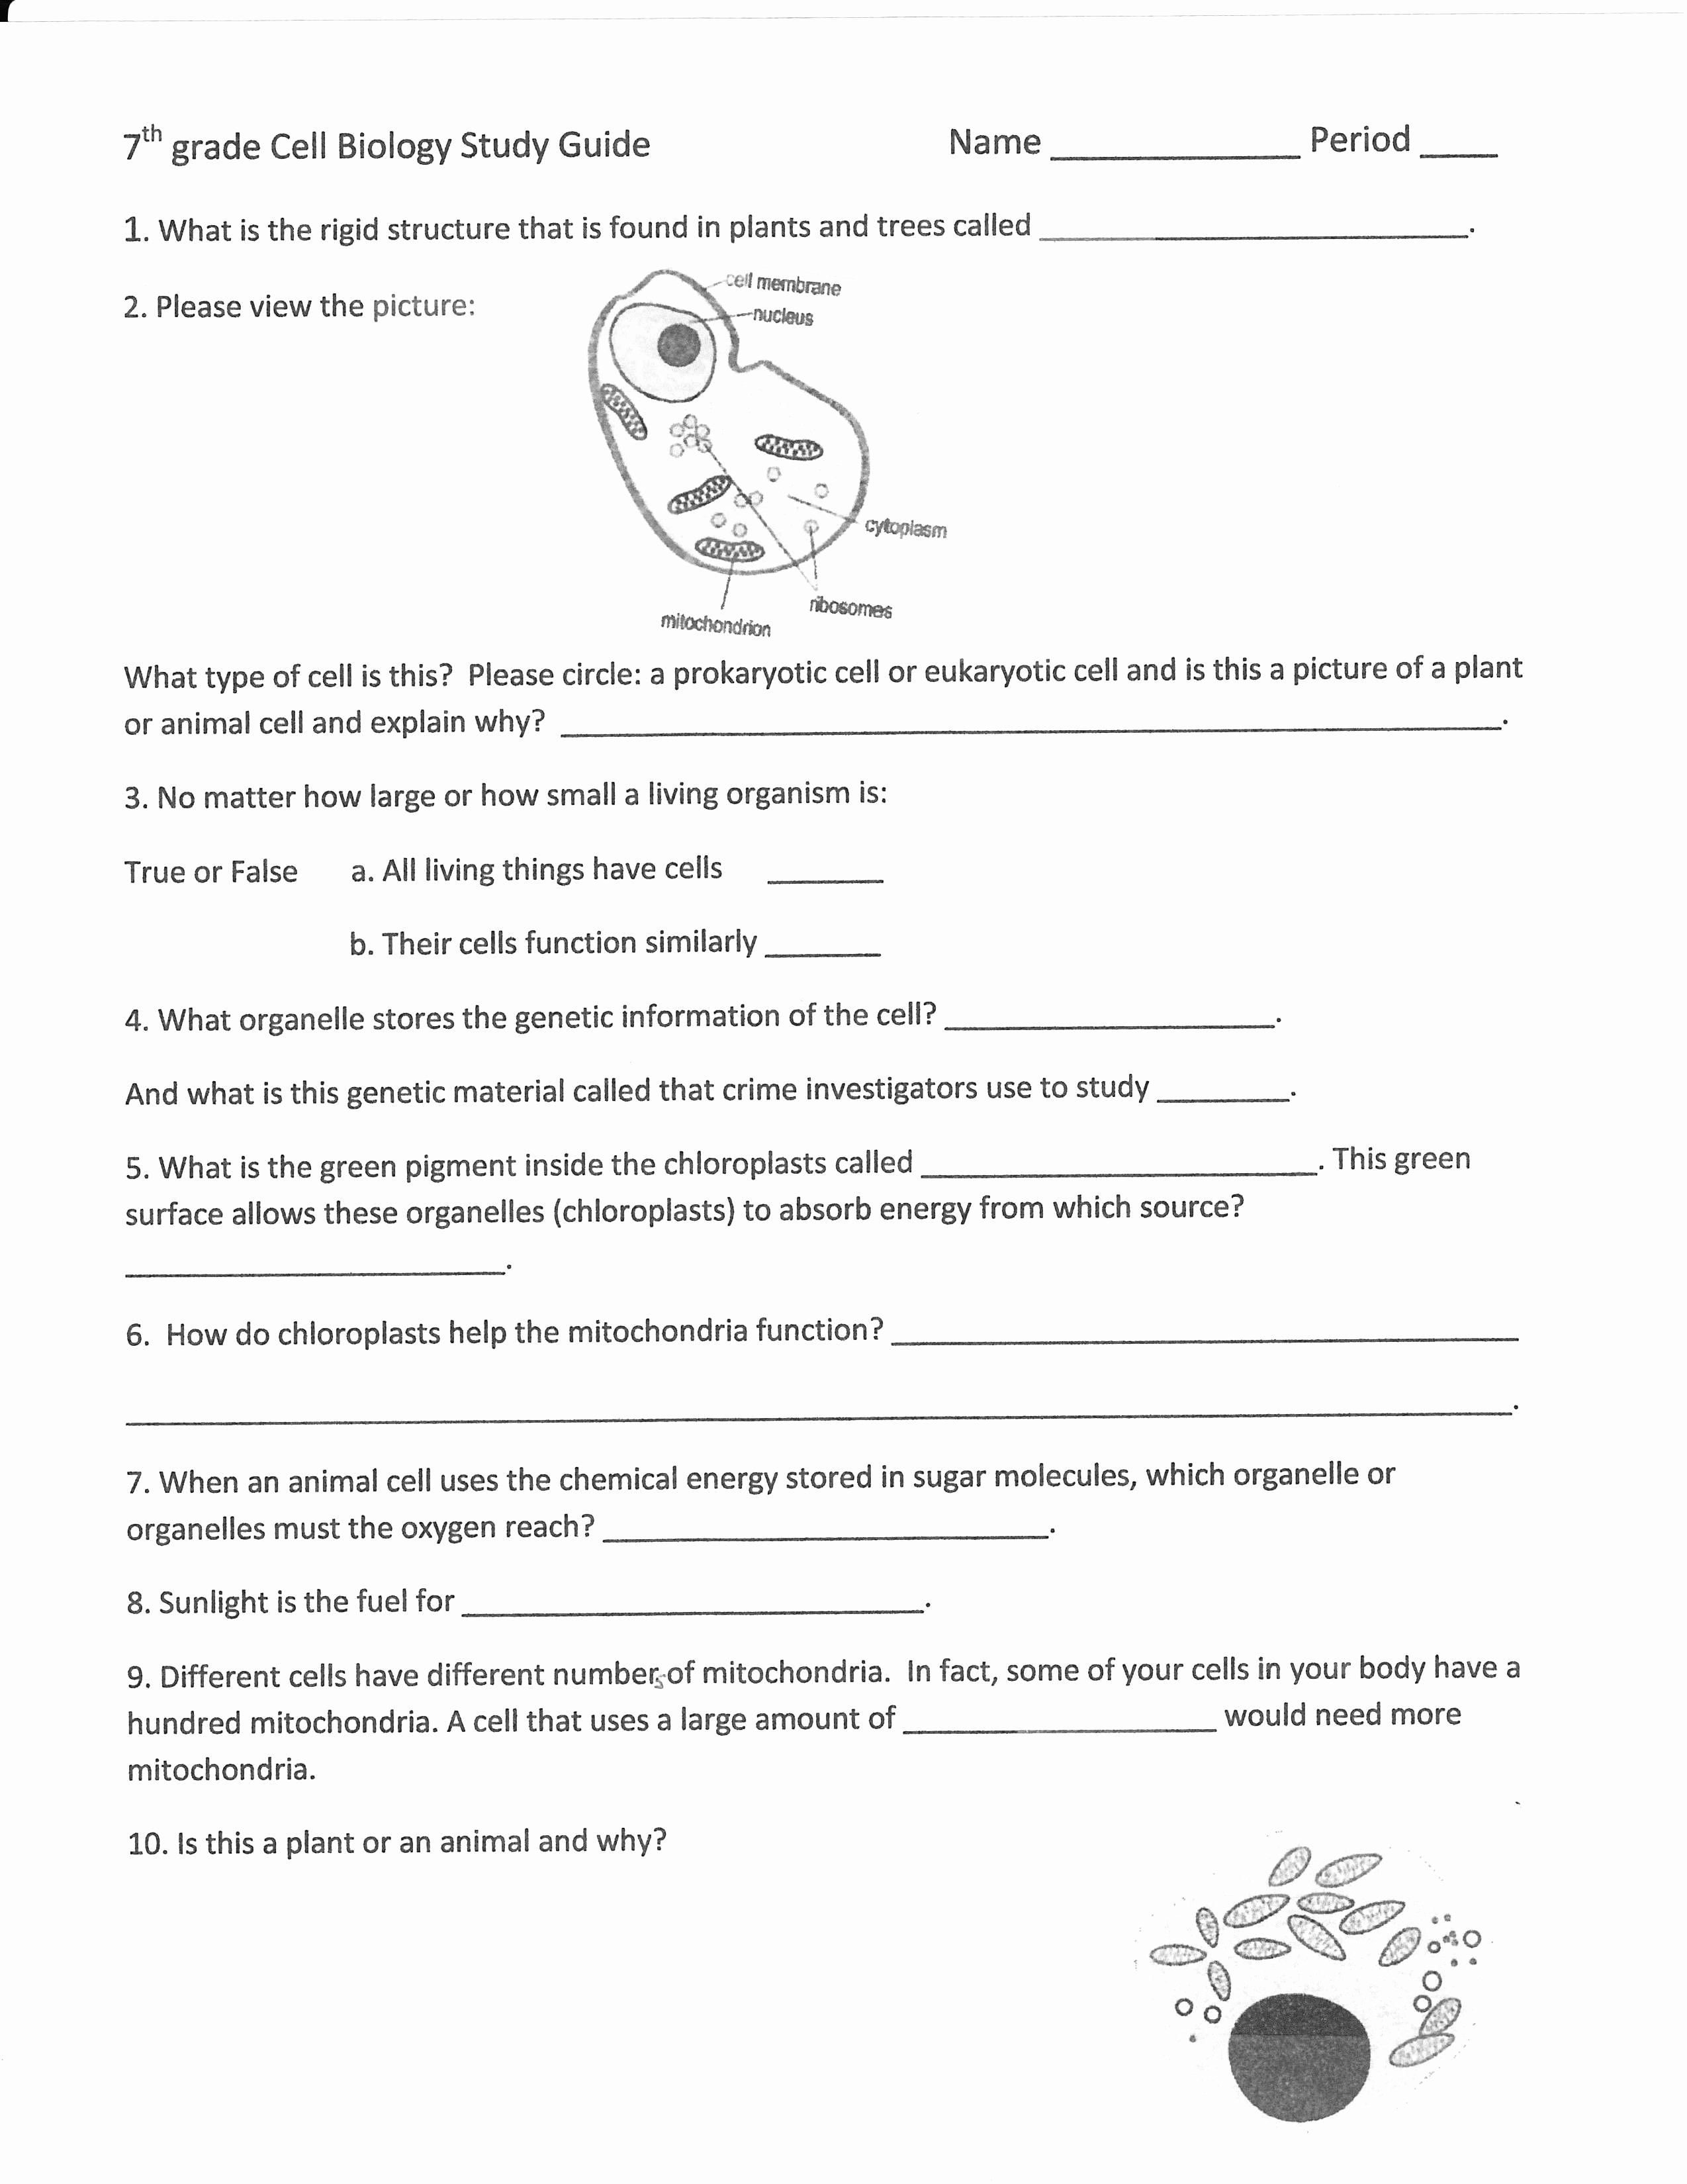 Animal Cell Worksheet Answers Elegant Cell organelles Worksheet Answer Key Worksheet Idea Template